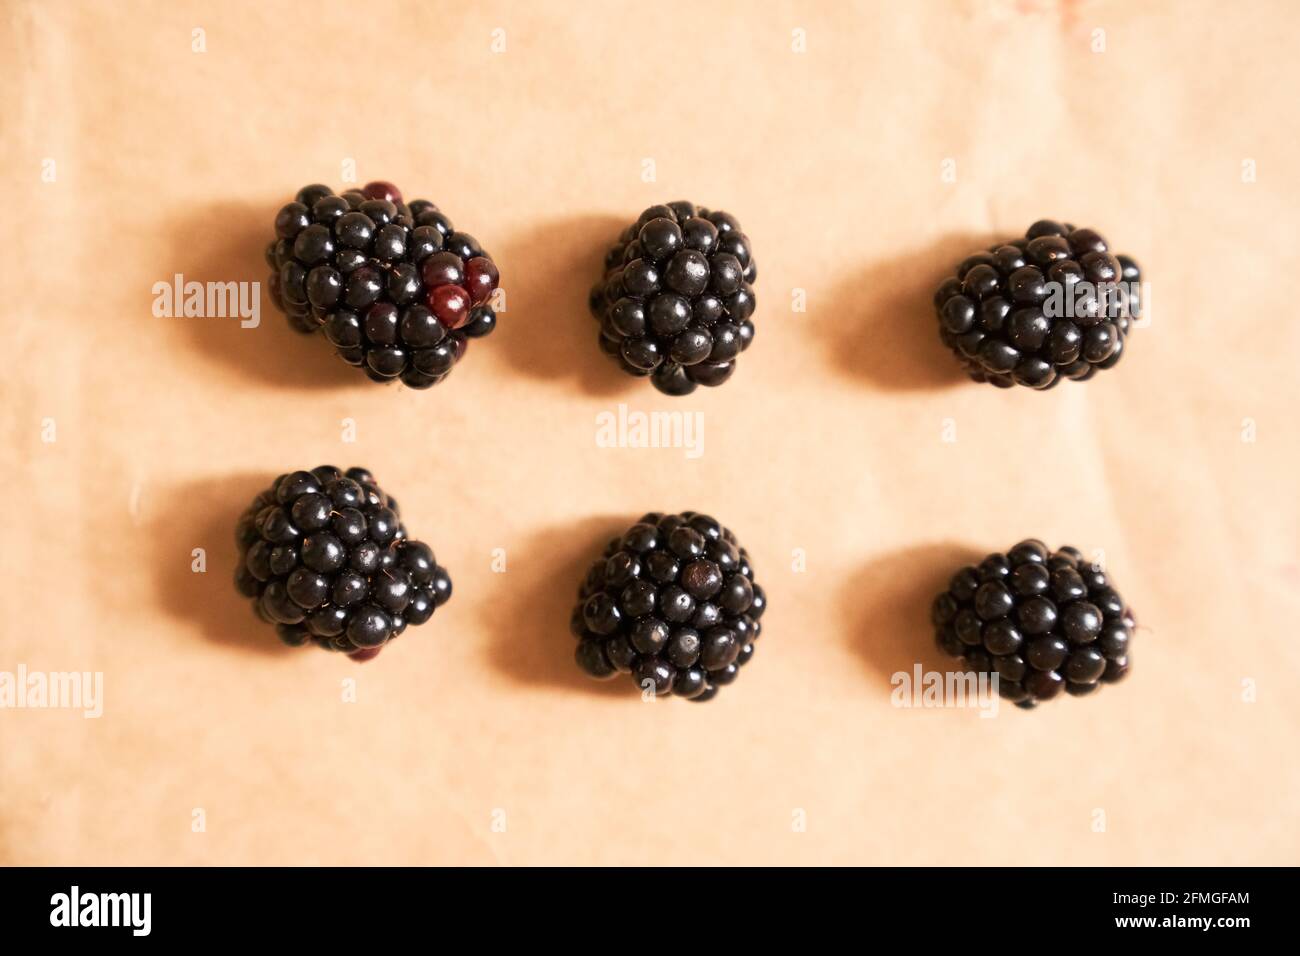 Six blackberries on a beige craft paper background. Berries laid out in the form of a rectangle. Horizontal card. Healthy, delicious, natural vegetarian background. Stock Photo